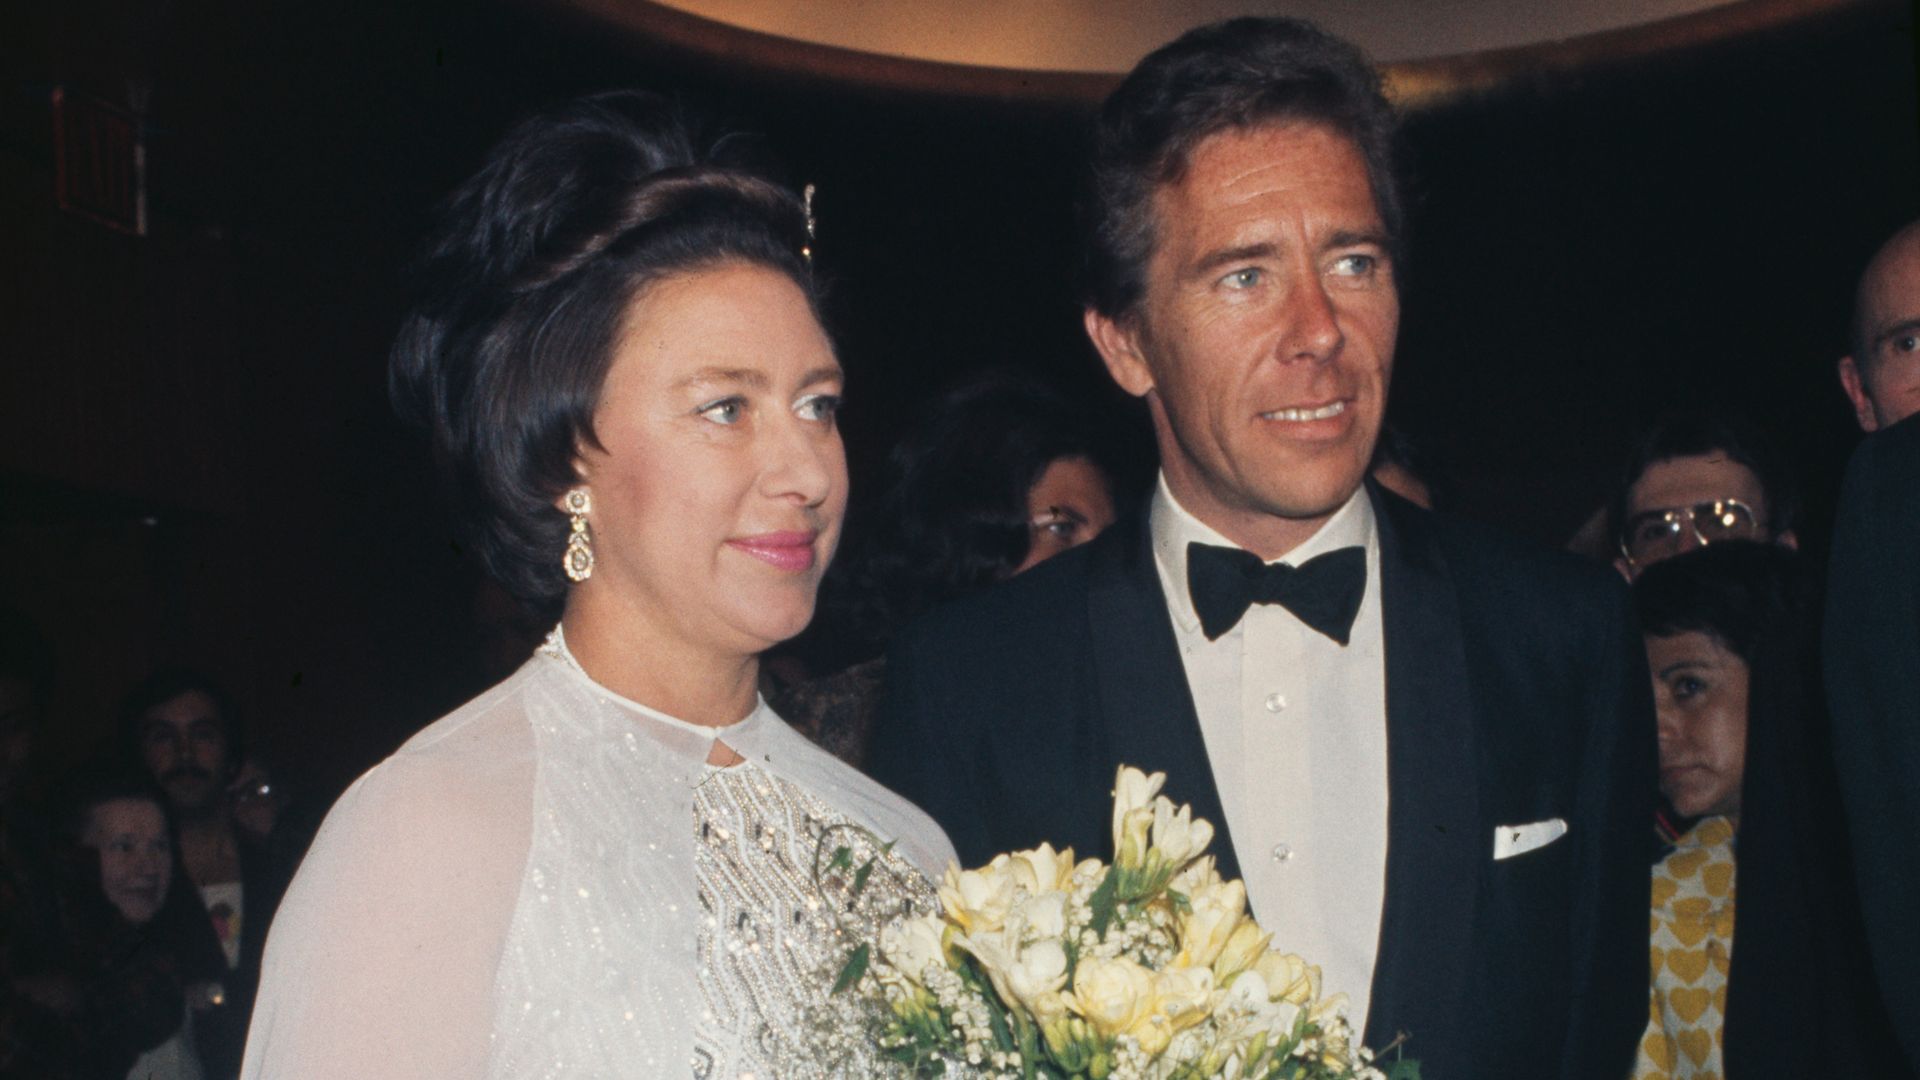 Princess Margaret and Antony Armstrong Jones' marriage – a look back at their relationship timeline